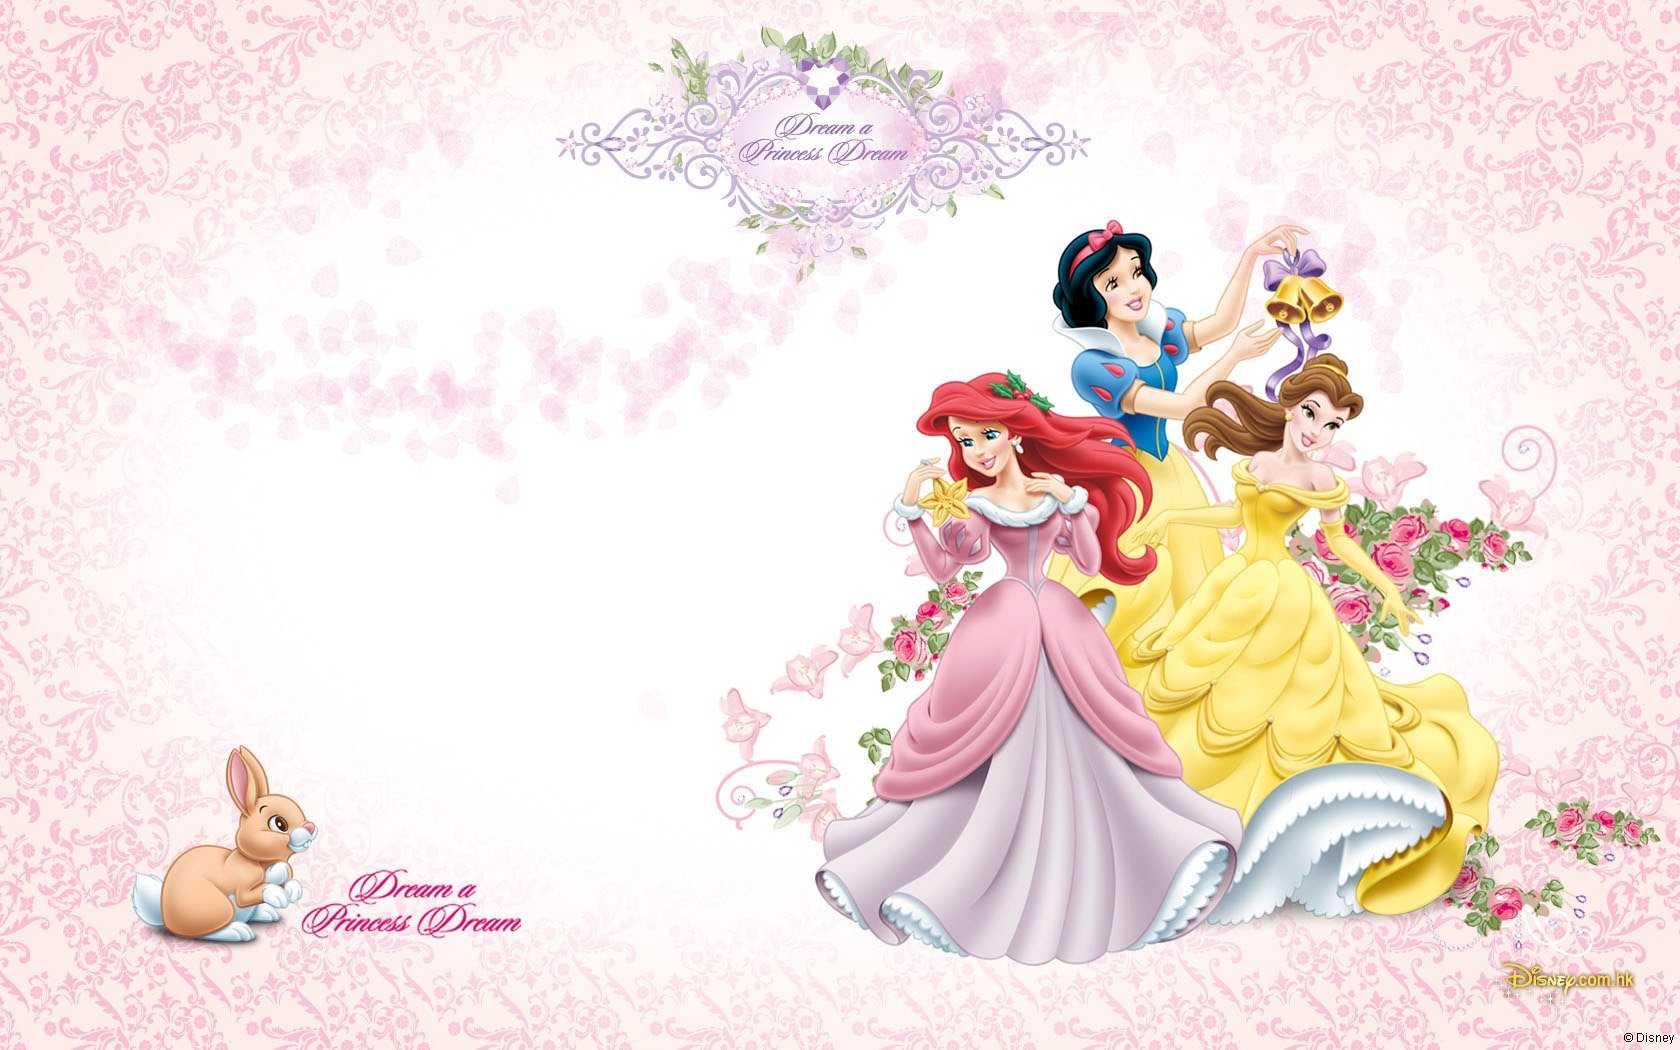 Disney Princess Wallpaper 18 Wallpaper Background Hd With Resolutions